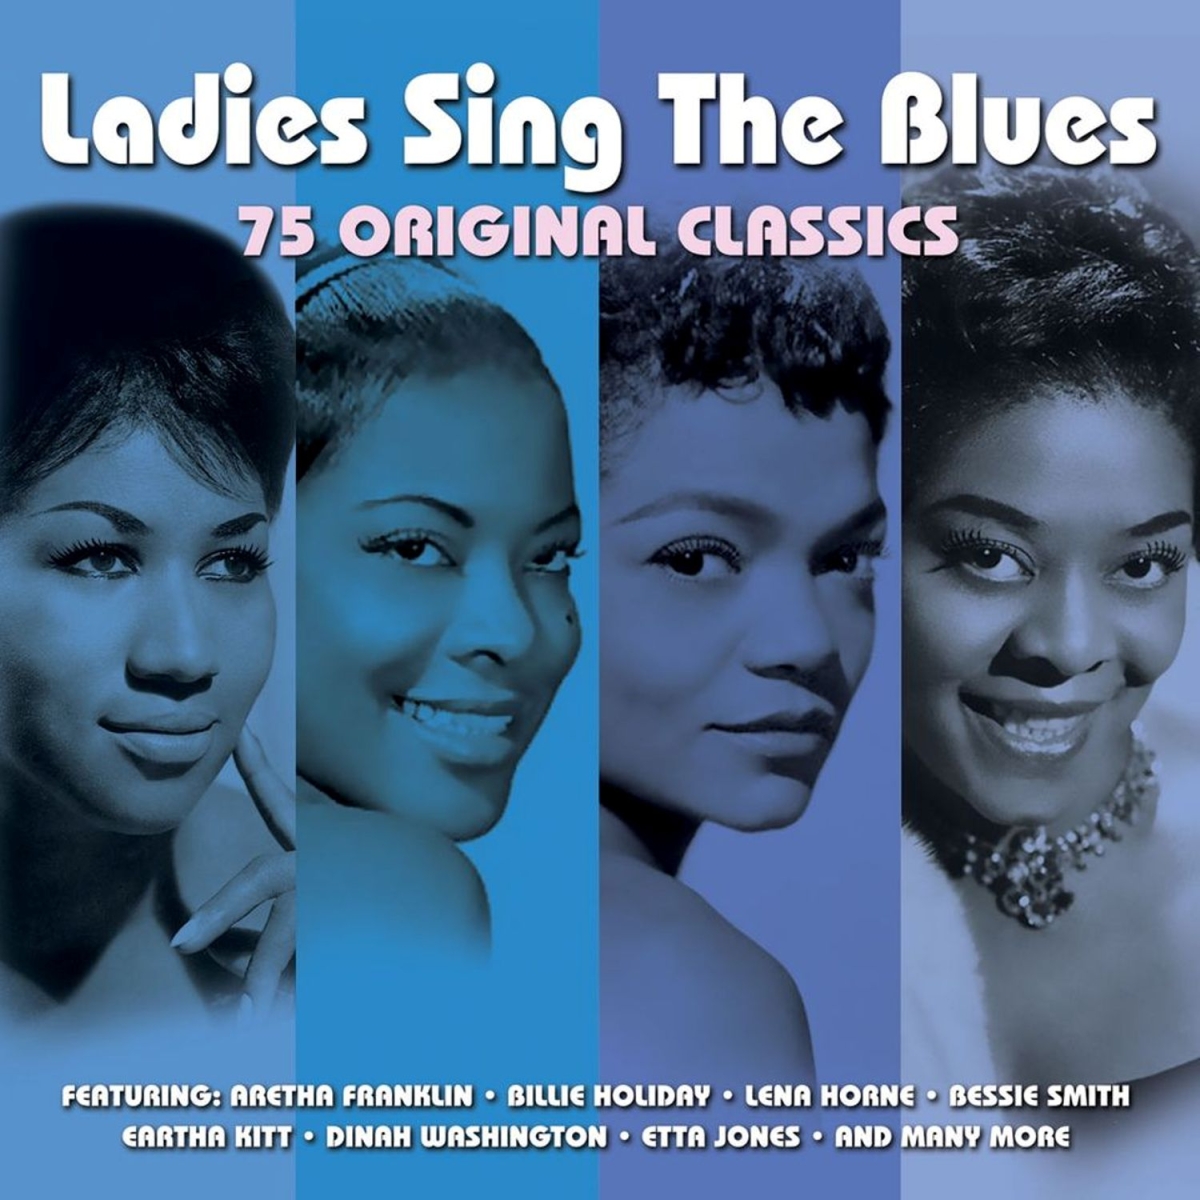 Singing the blues. Lady Sings the Blues. Lady Sings. Ladies Sing & Play the Blues Vol.3.. Ladies Sing the Blues (3 CD).